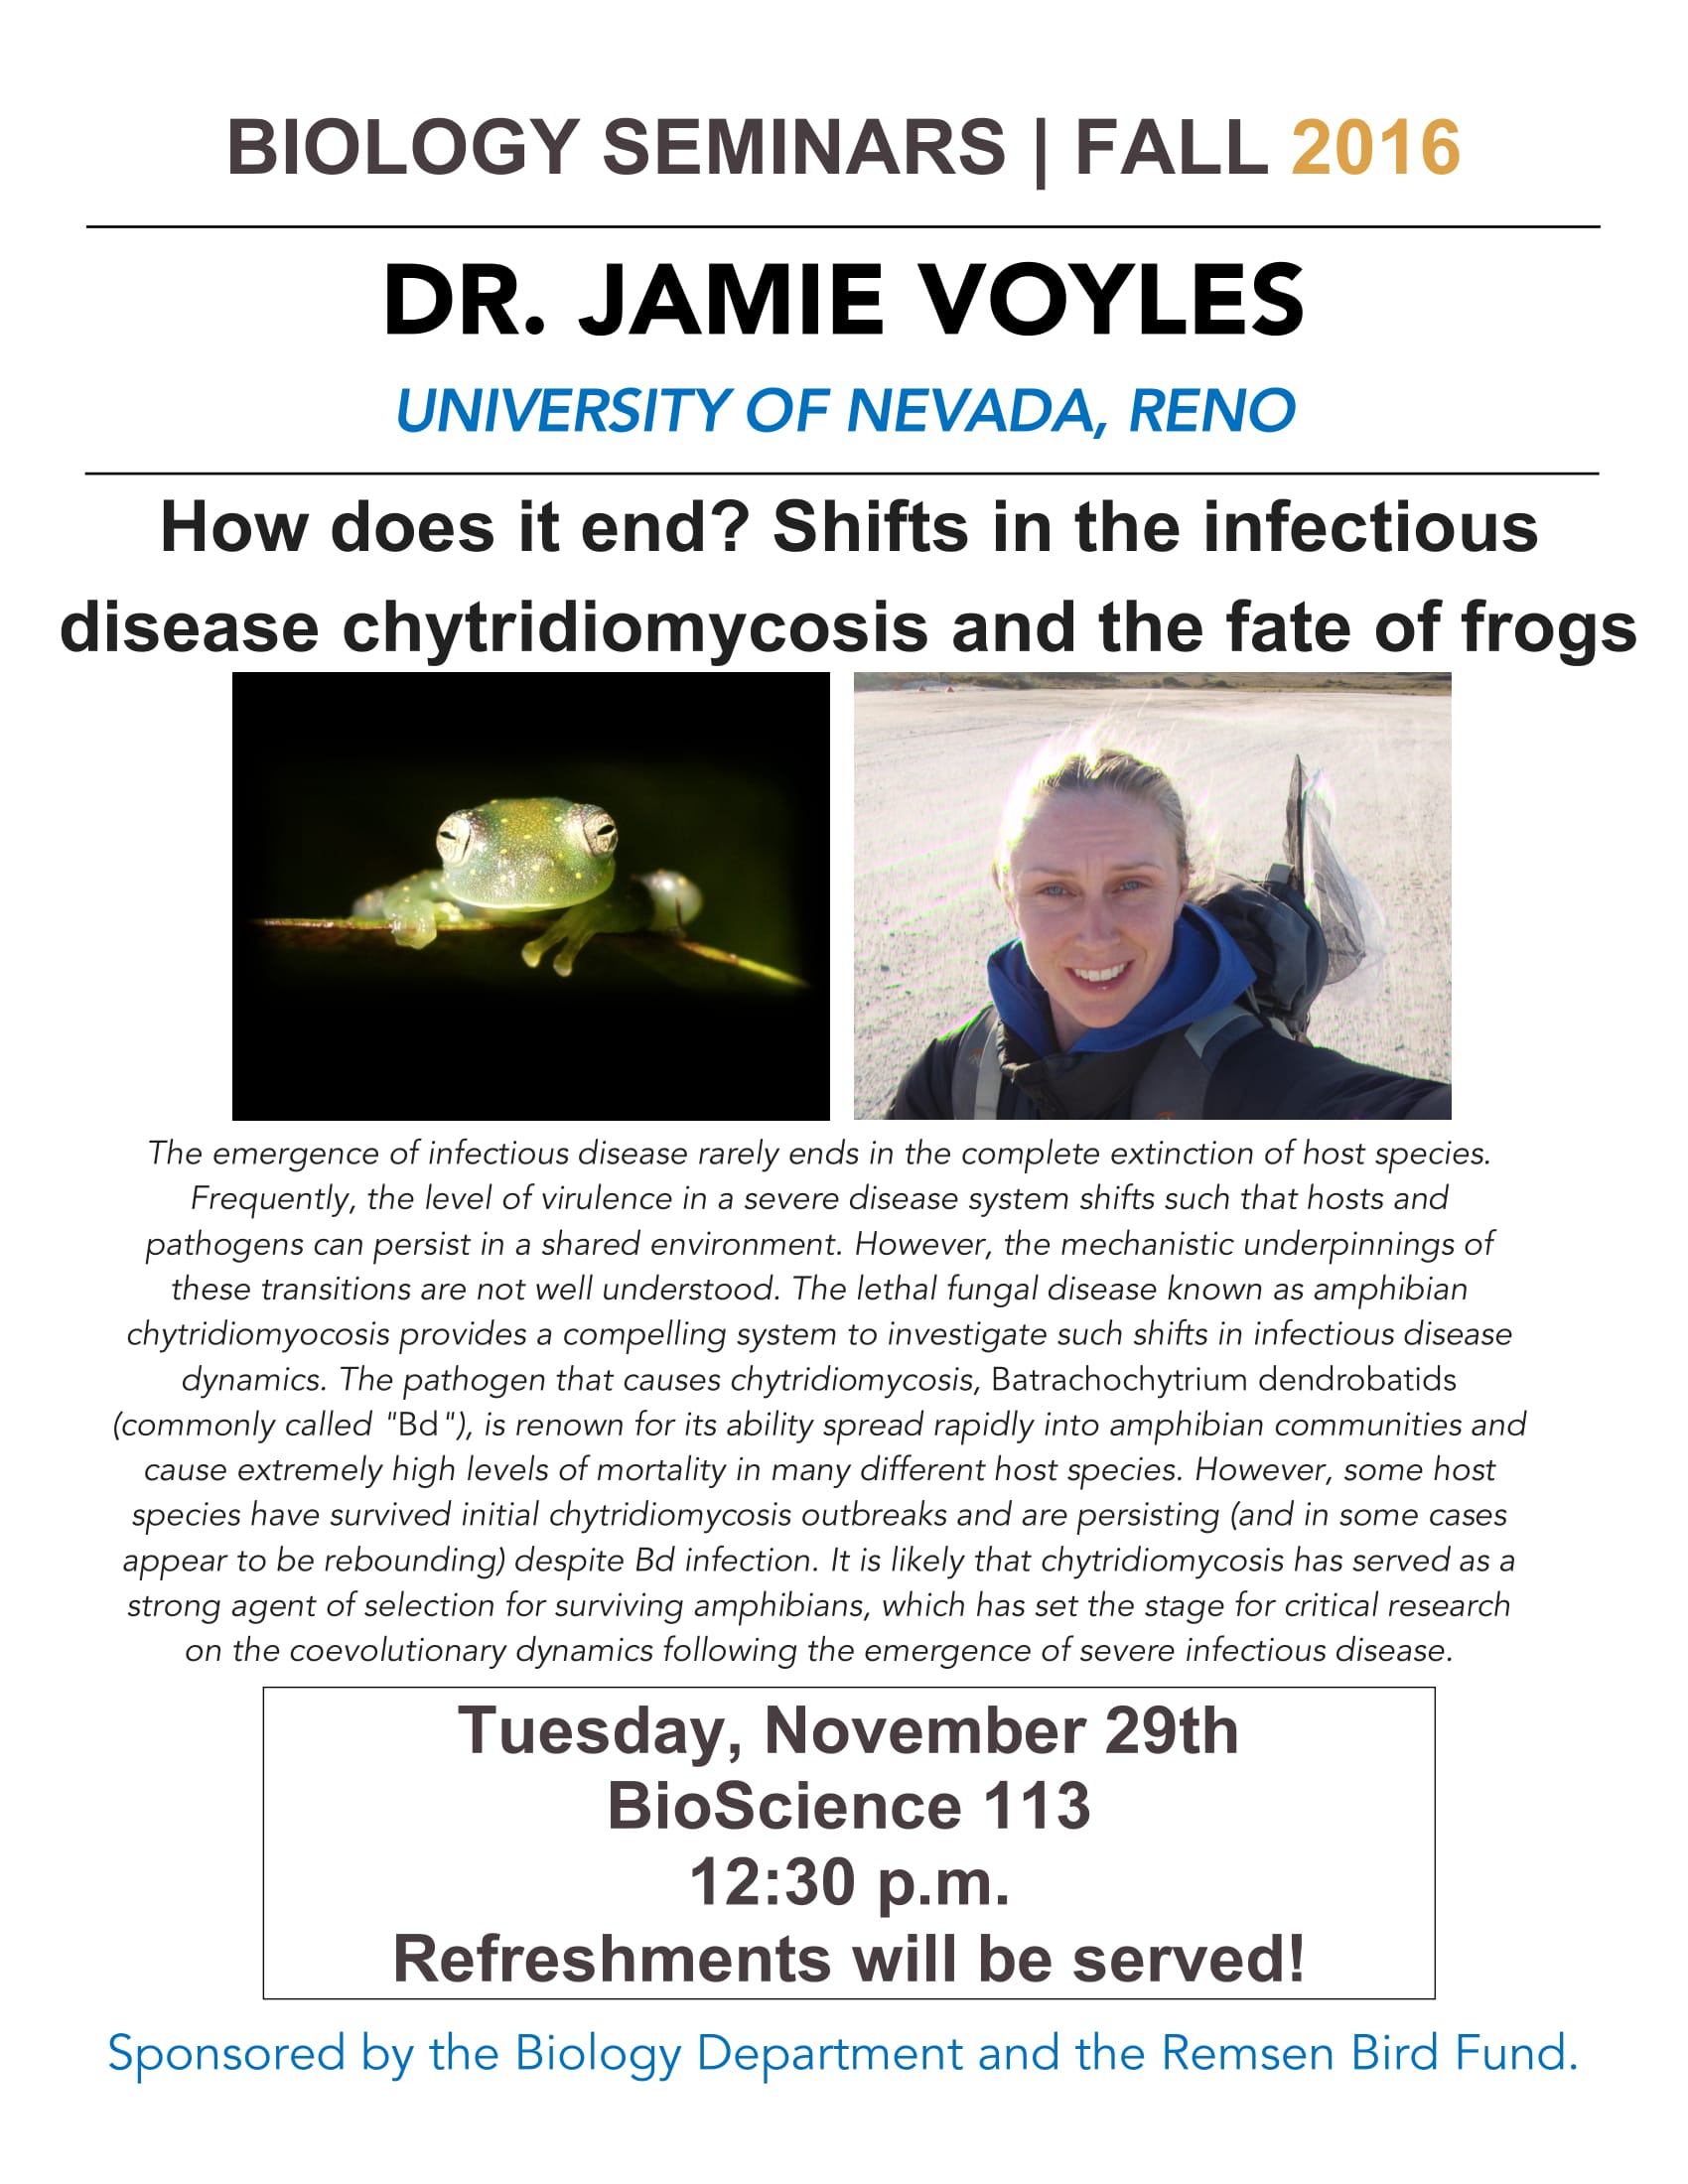 Image for Dr. Jamie Voyles: How does it end? Shifts in the i